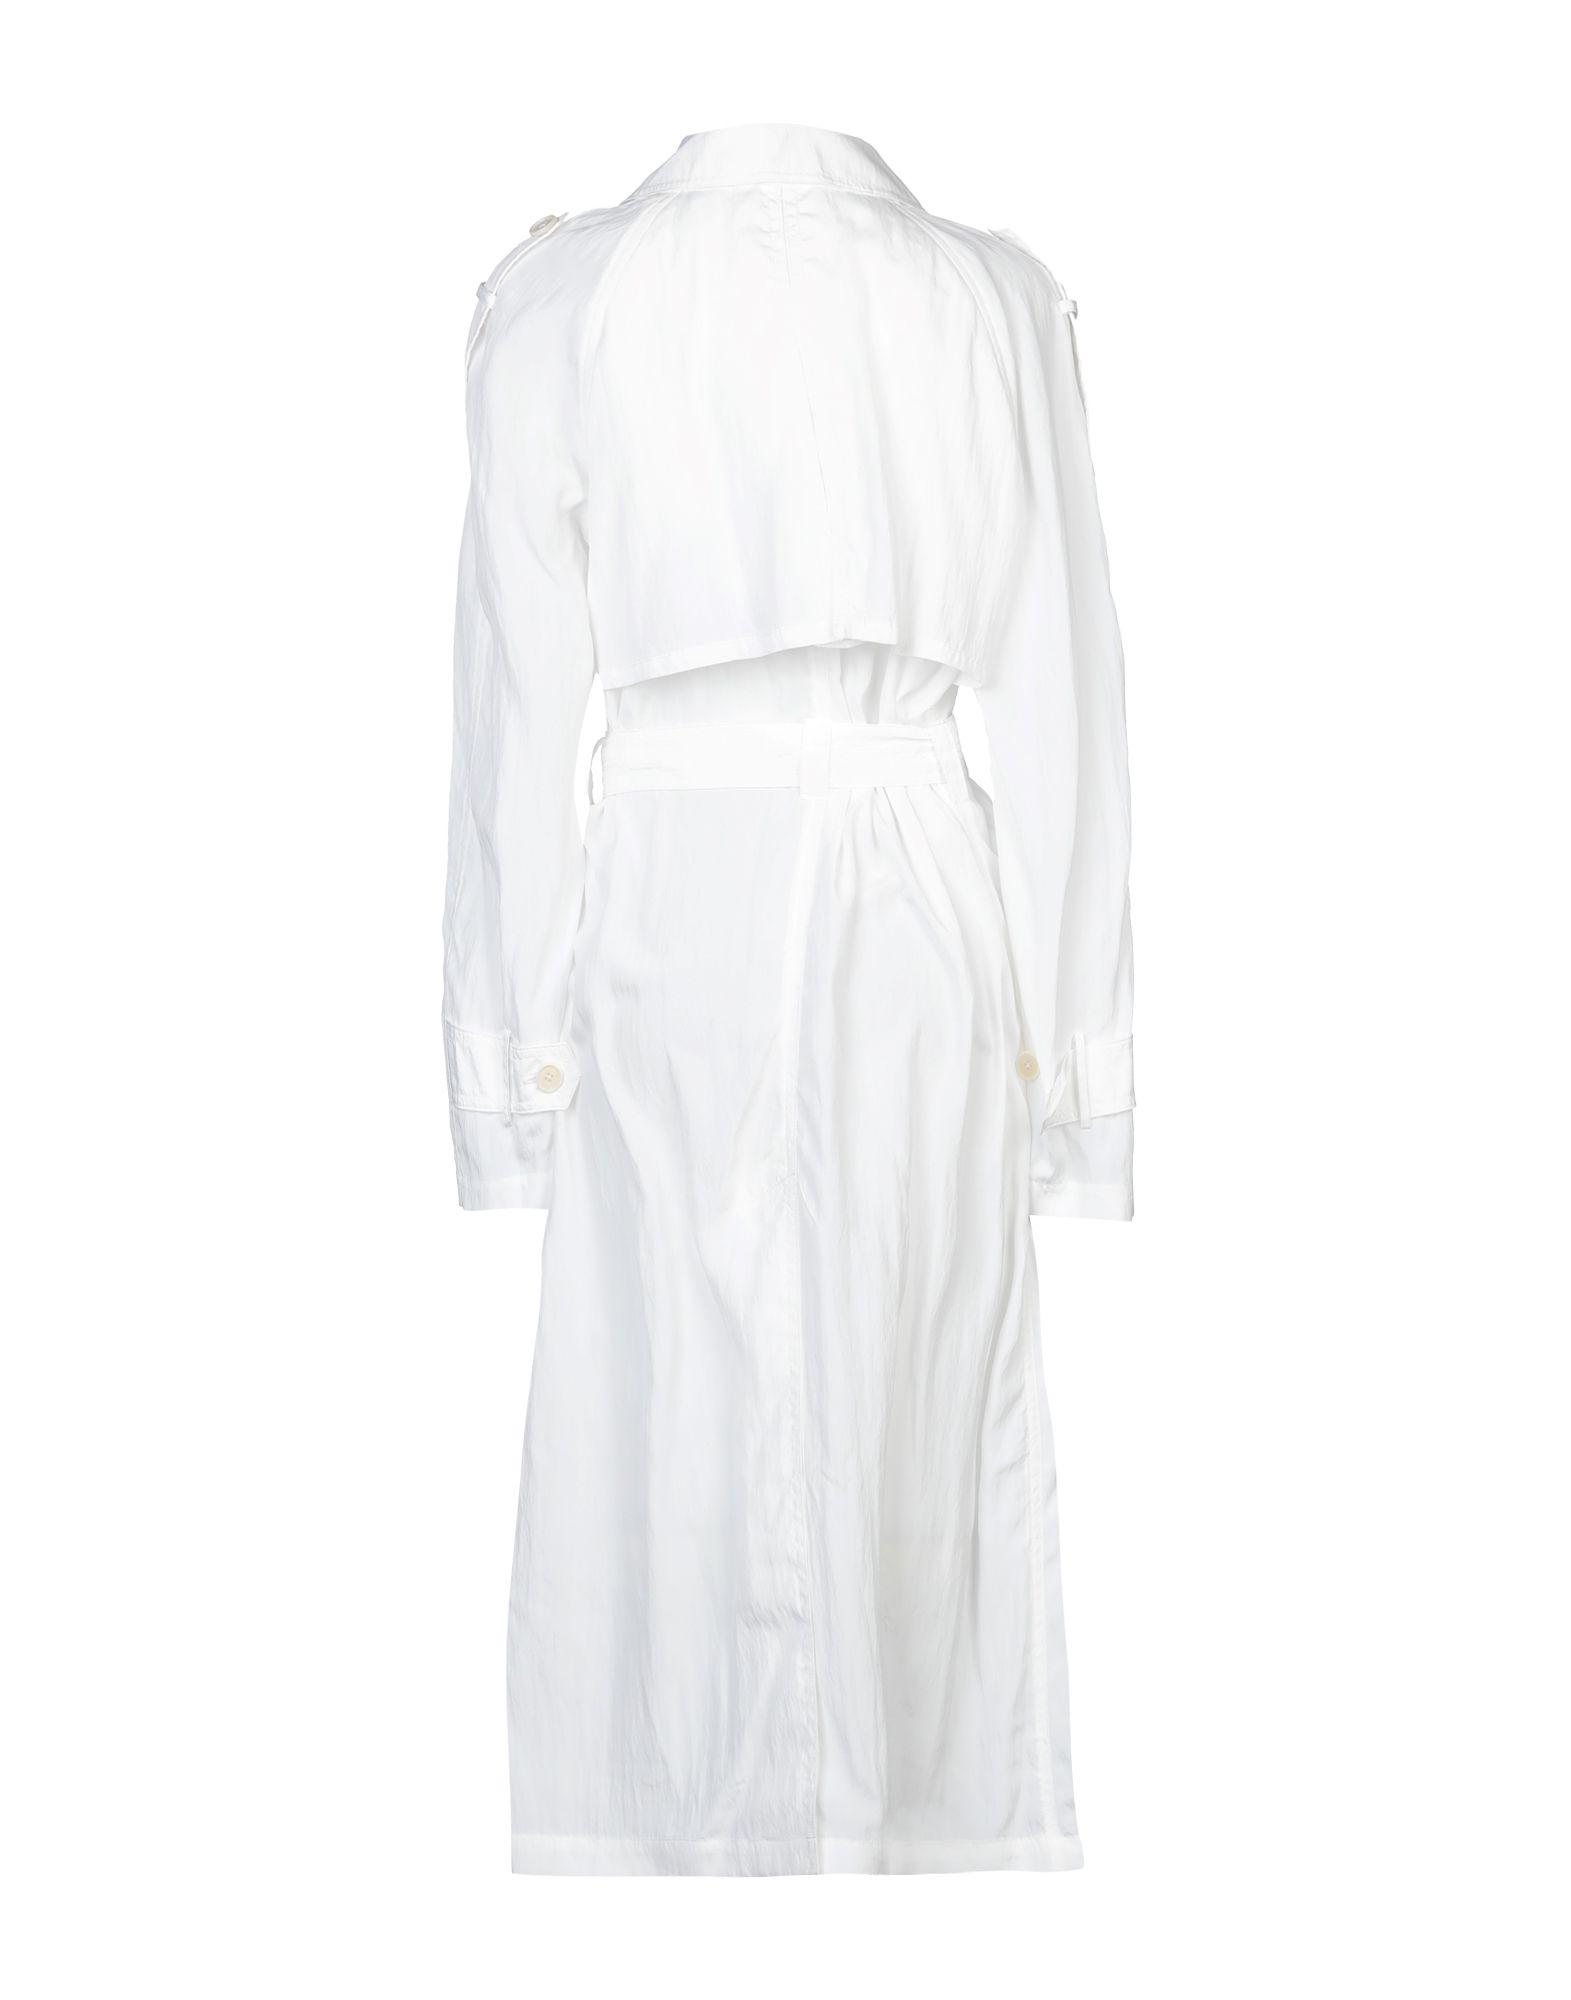 Helmut Lang Synthetic Overcoat in White - Lyst